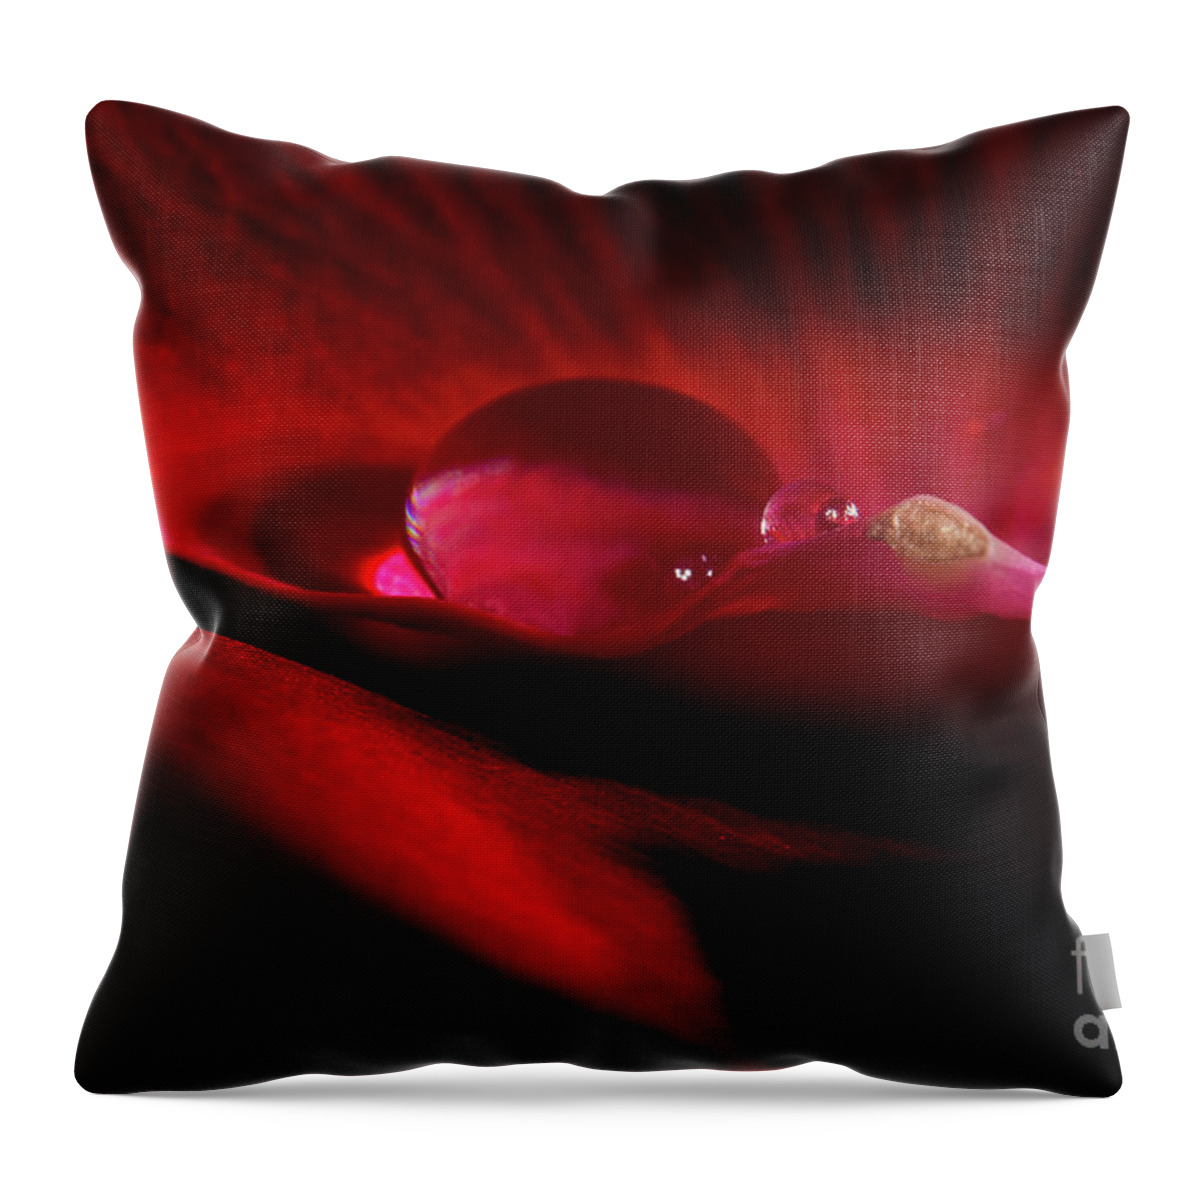 Rose Throw Pillow featuring the photograph Rose Petal Droplet by Mike Eingle